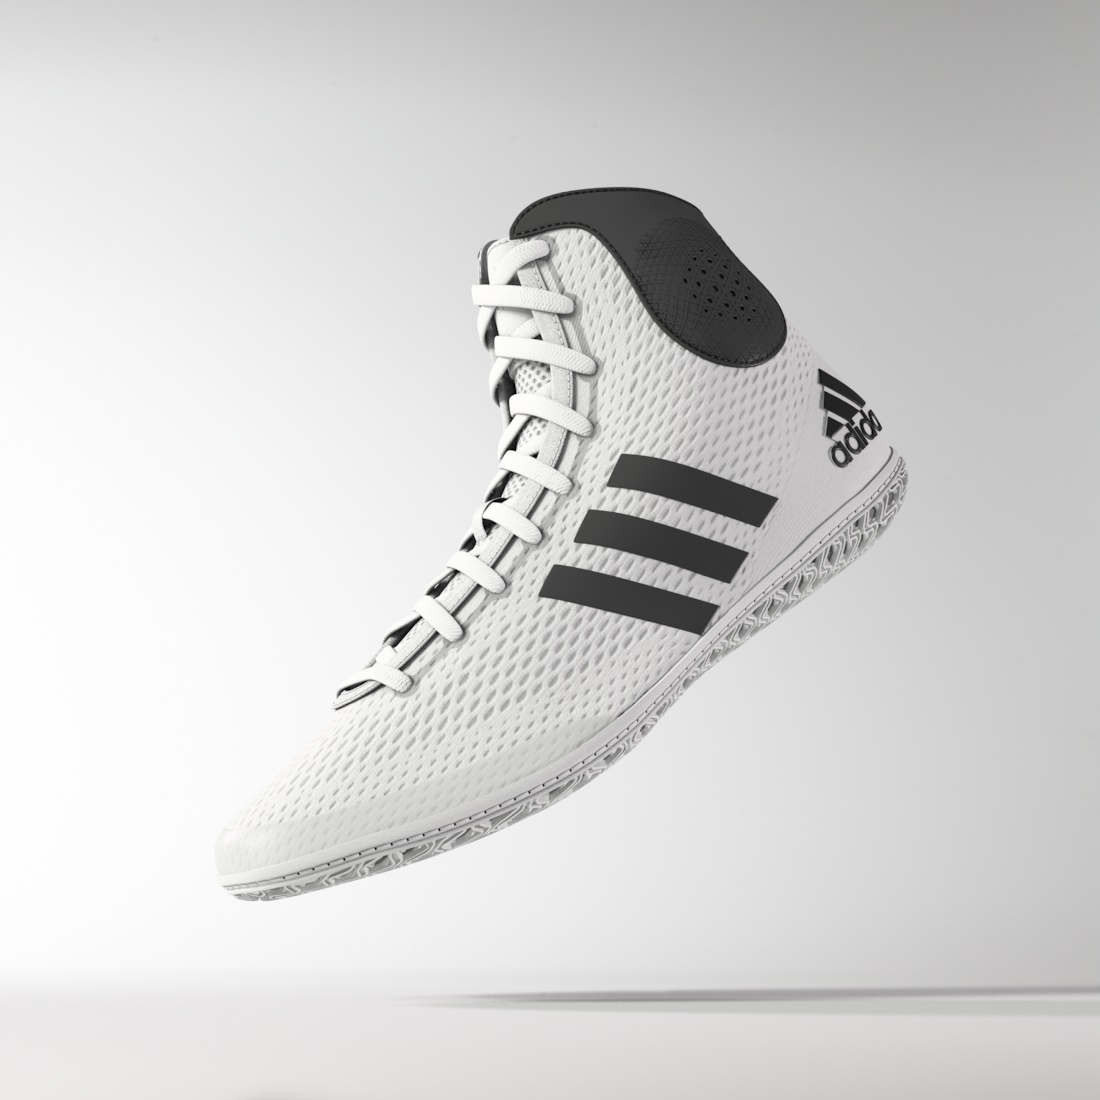 black and white adidas wrestling shoes